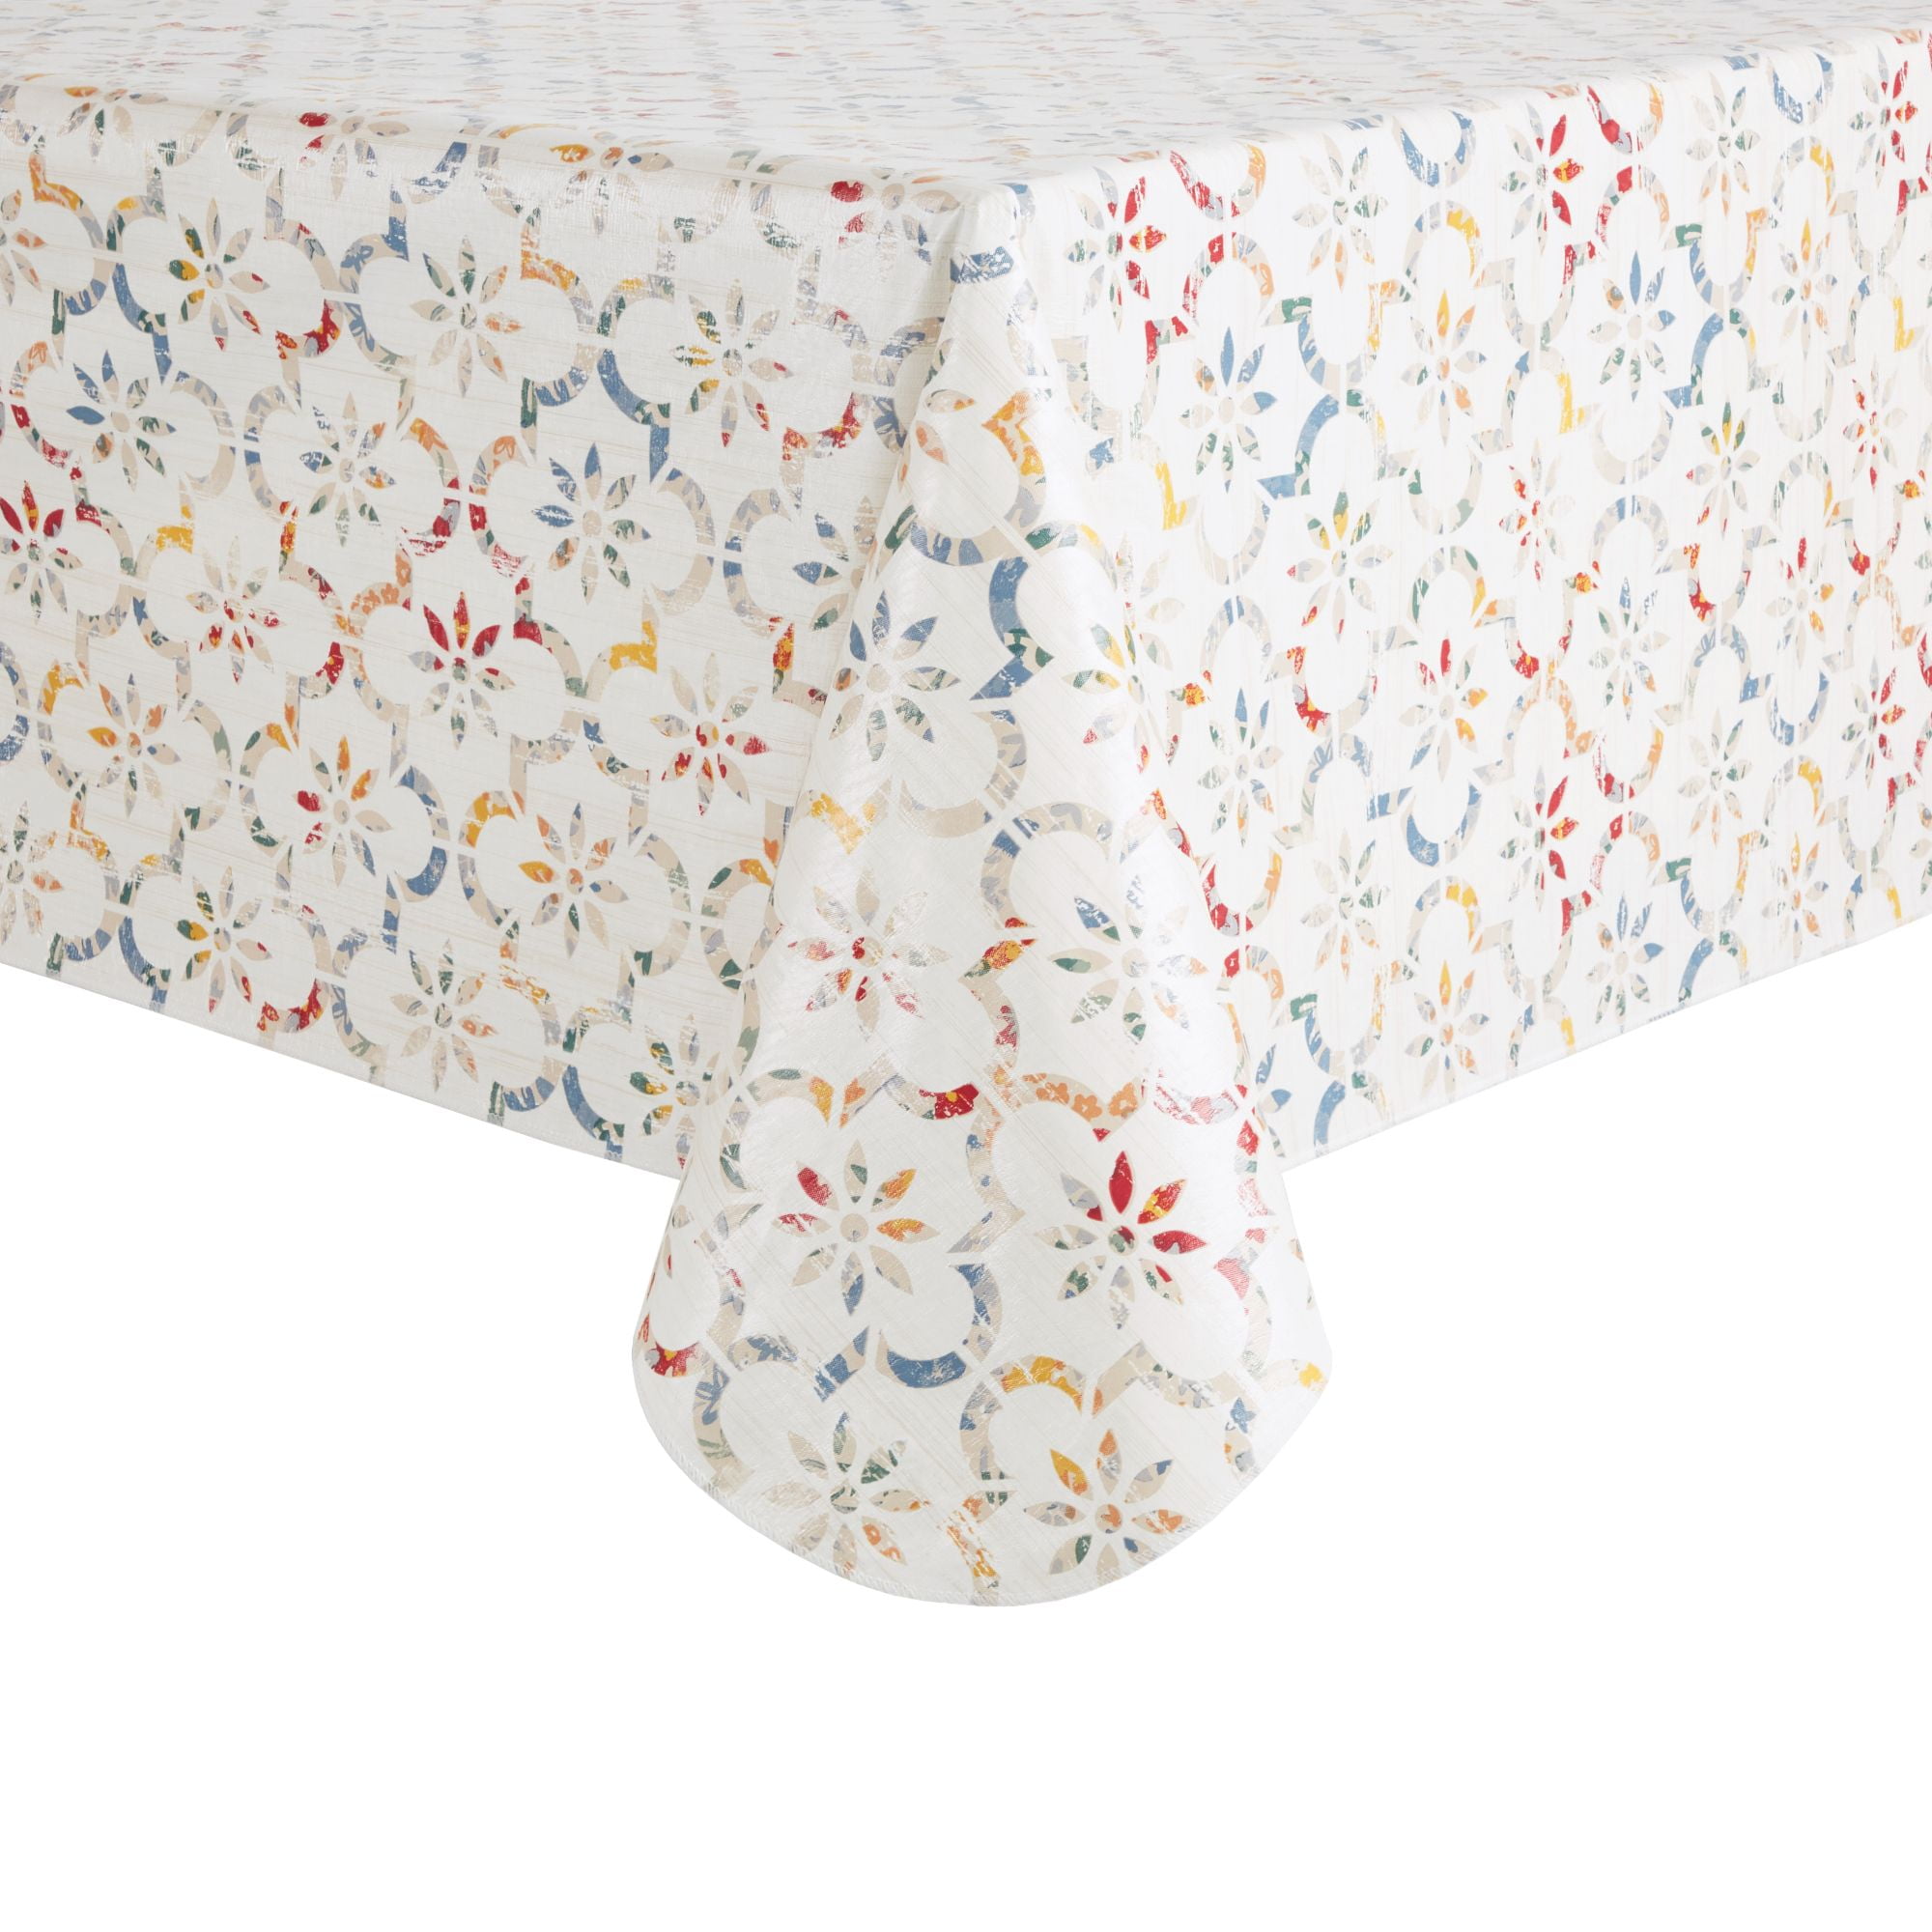 Mainstays Ogee Tile PEVA Tablecloth, Multi, 60"W x 102"L Rectangle, Available in various sizes